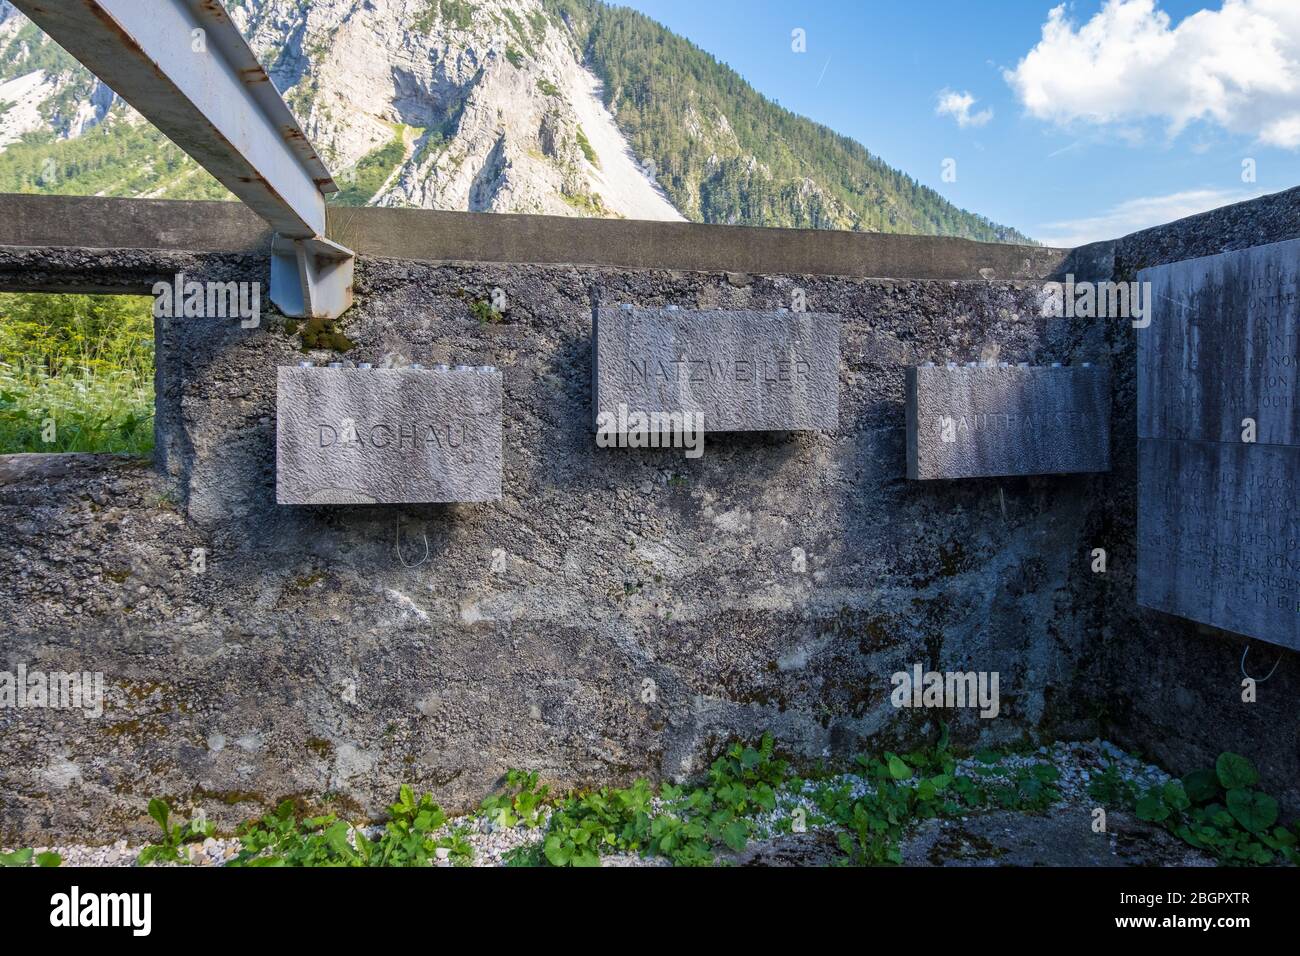 Ljubelj, Slovenia - August 09, 2019: Remains of Camp Loibl in Slovenia. Memorial Plaques with names of Concentration Camps. Memorial park Mauthausen Stock Photo